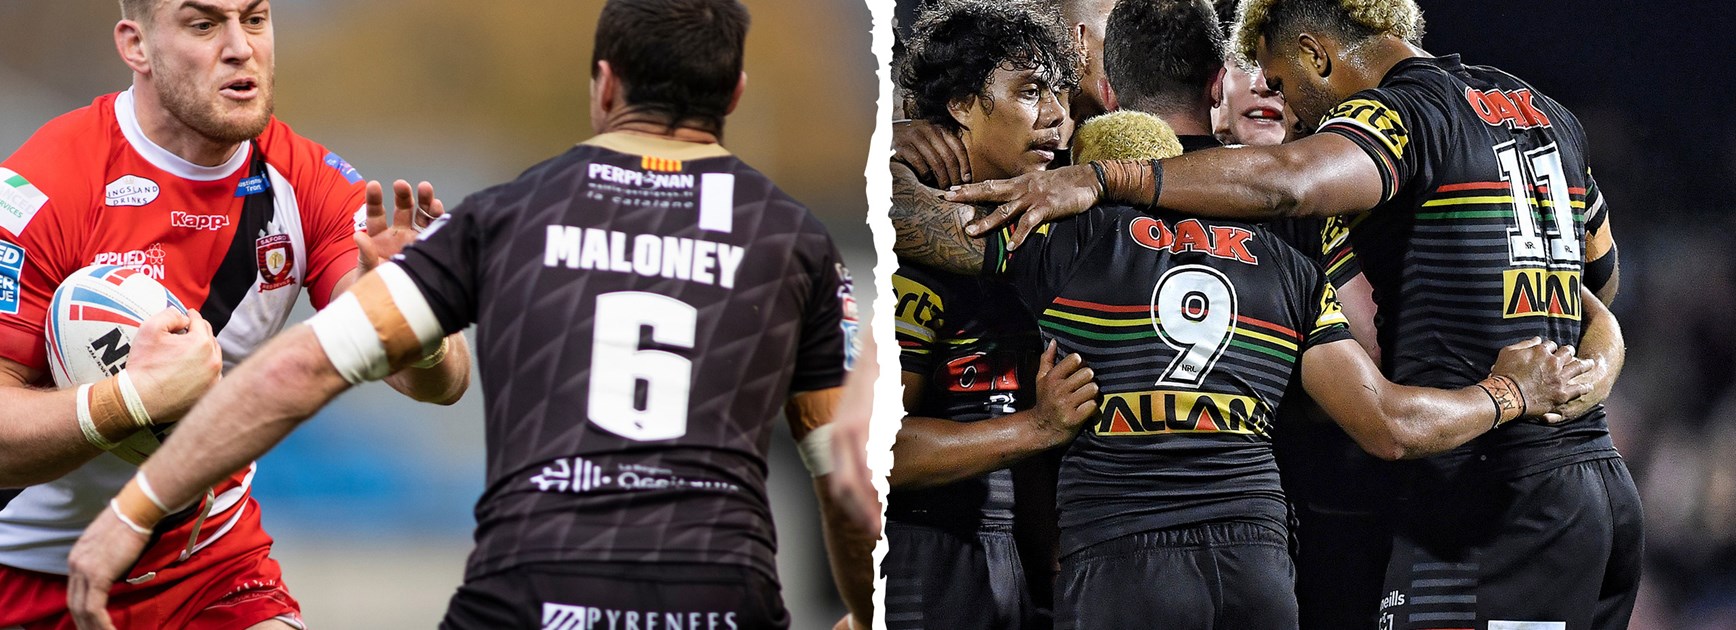 For & Against: Should players have designated numbers and surnames on jerseys?